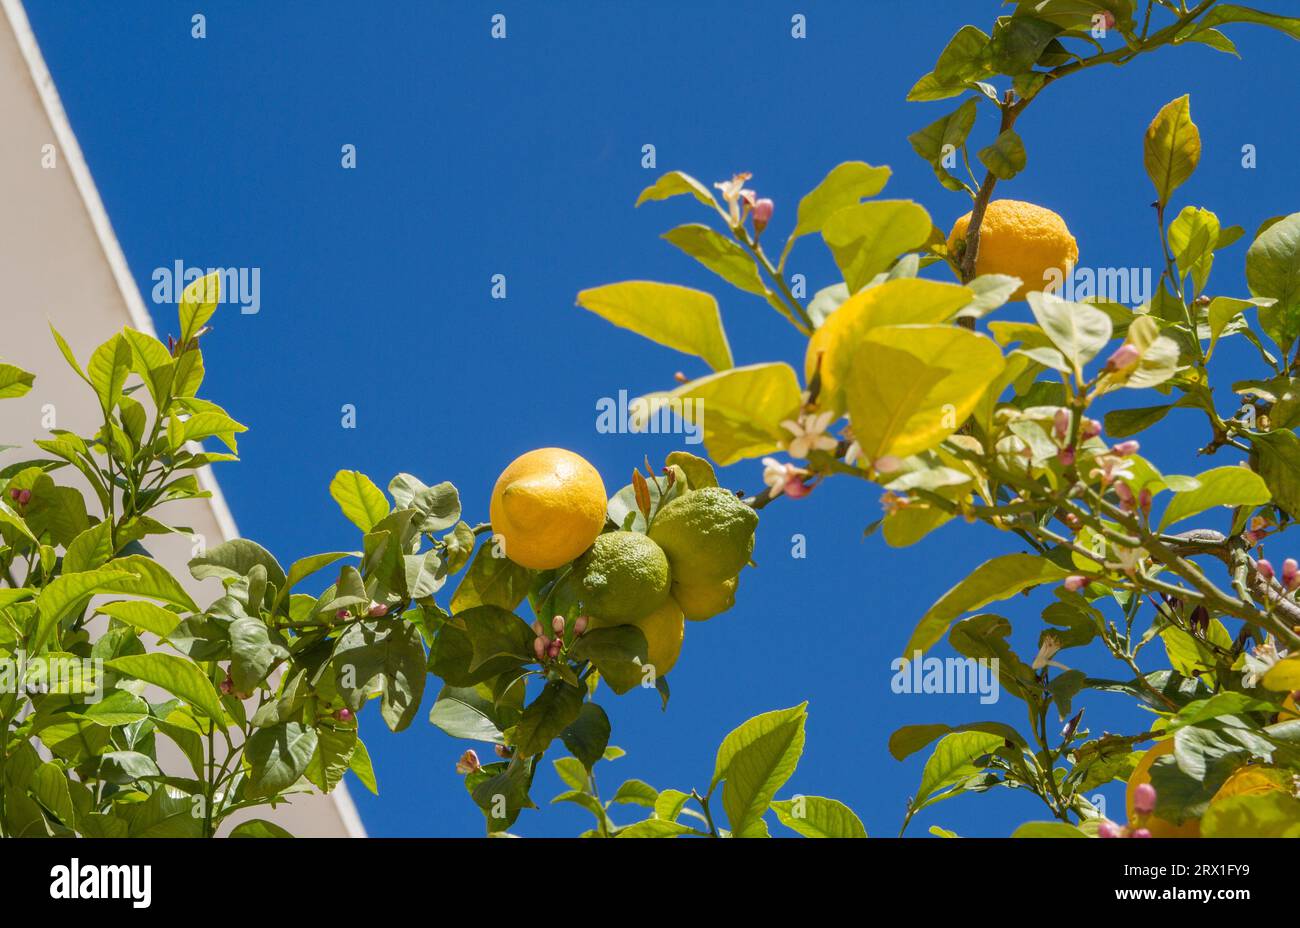 Ripe yellow and green lemon fruits on tree with blossoms, leaves and blue sky (copy space), Ibiza island, Spain Stock Photo